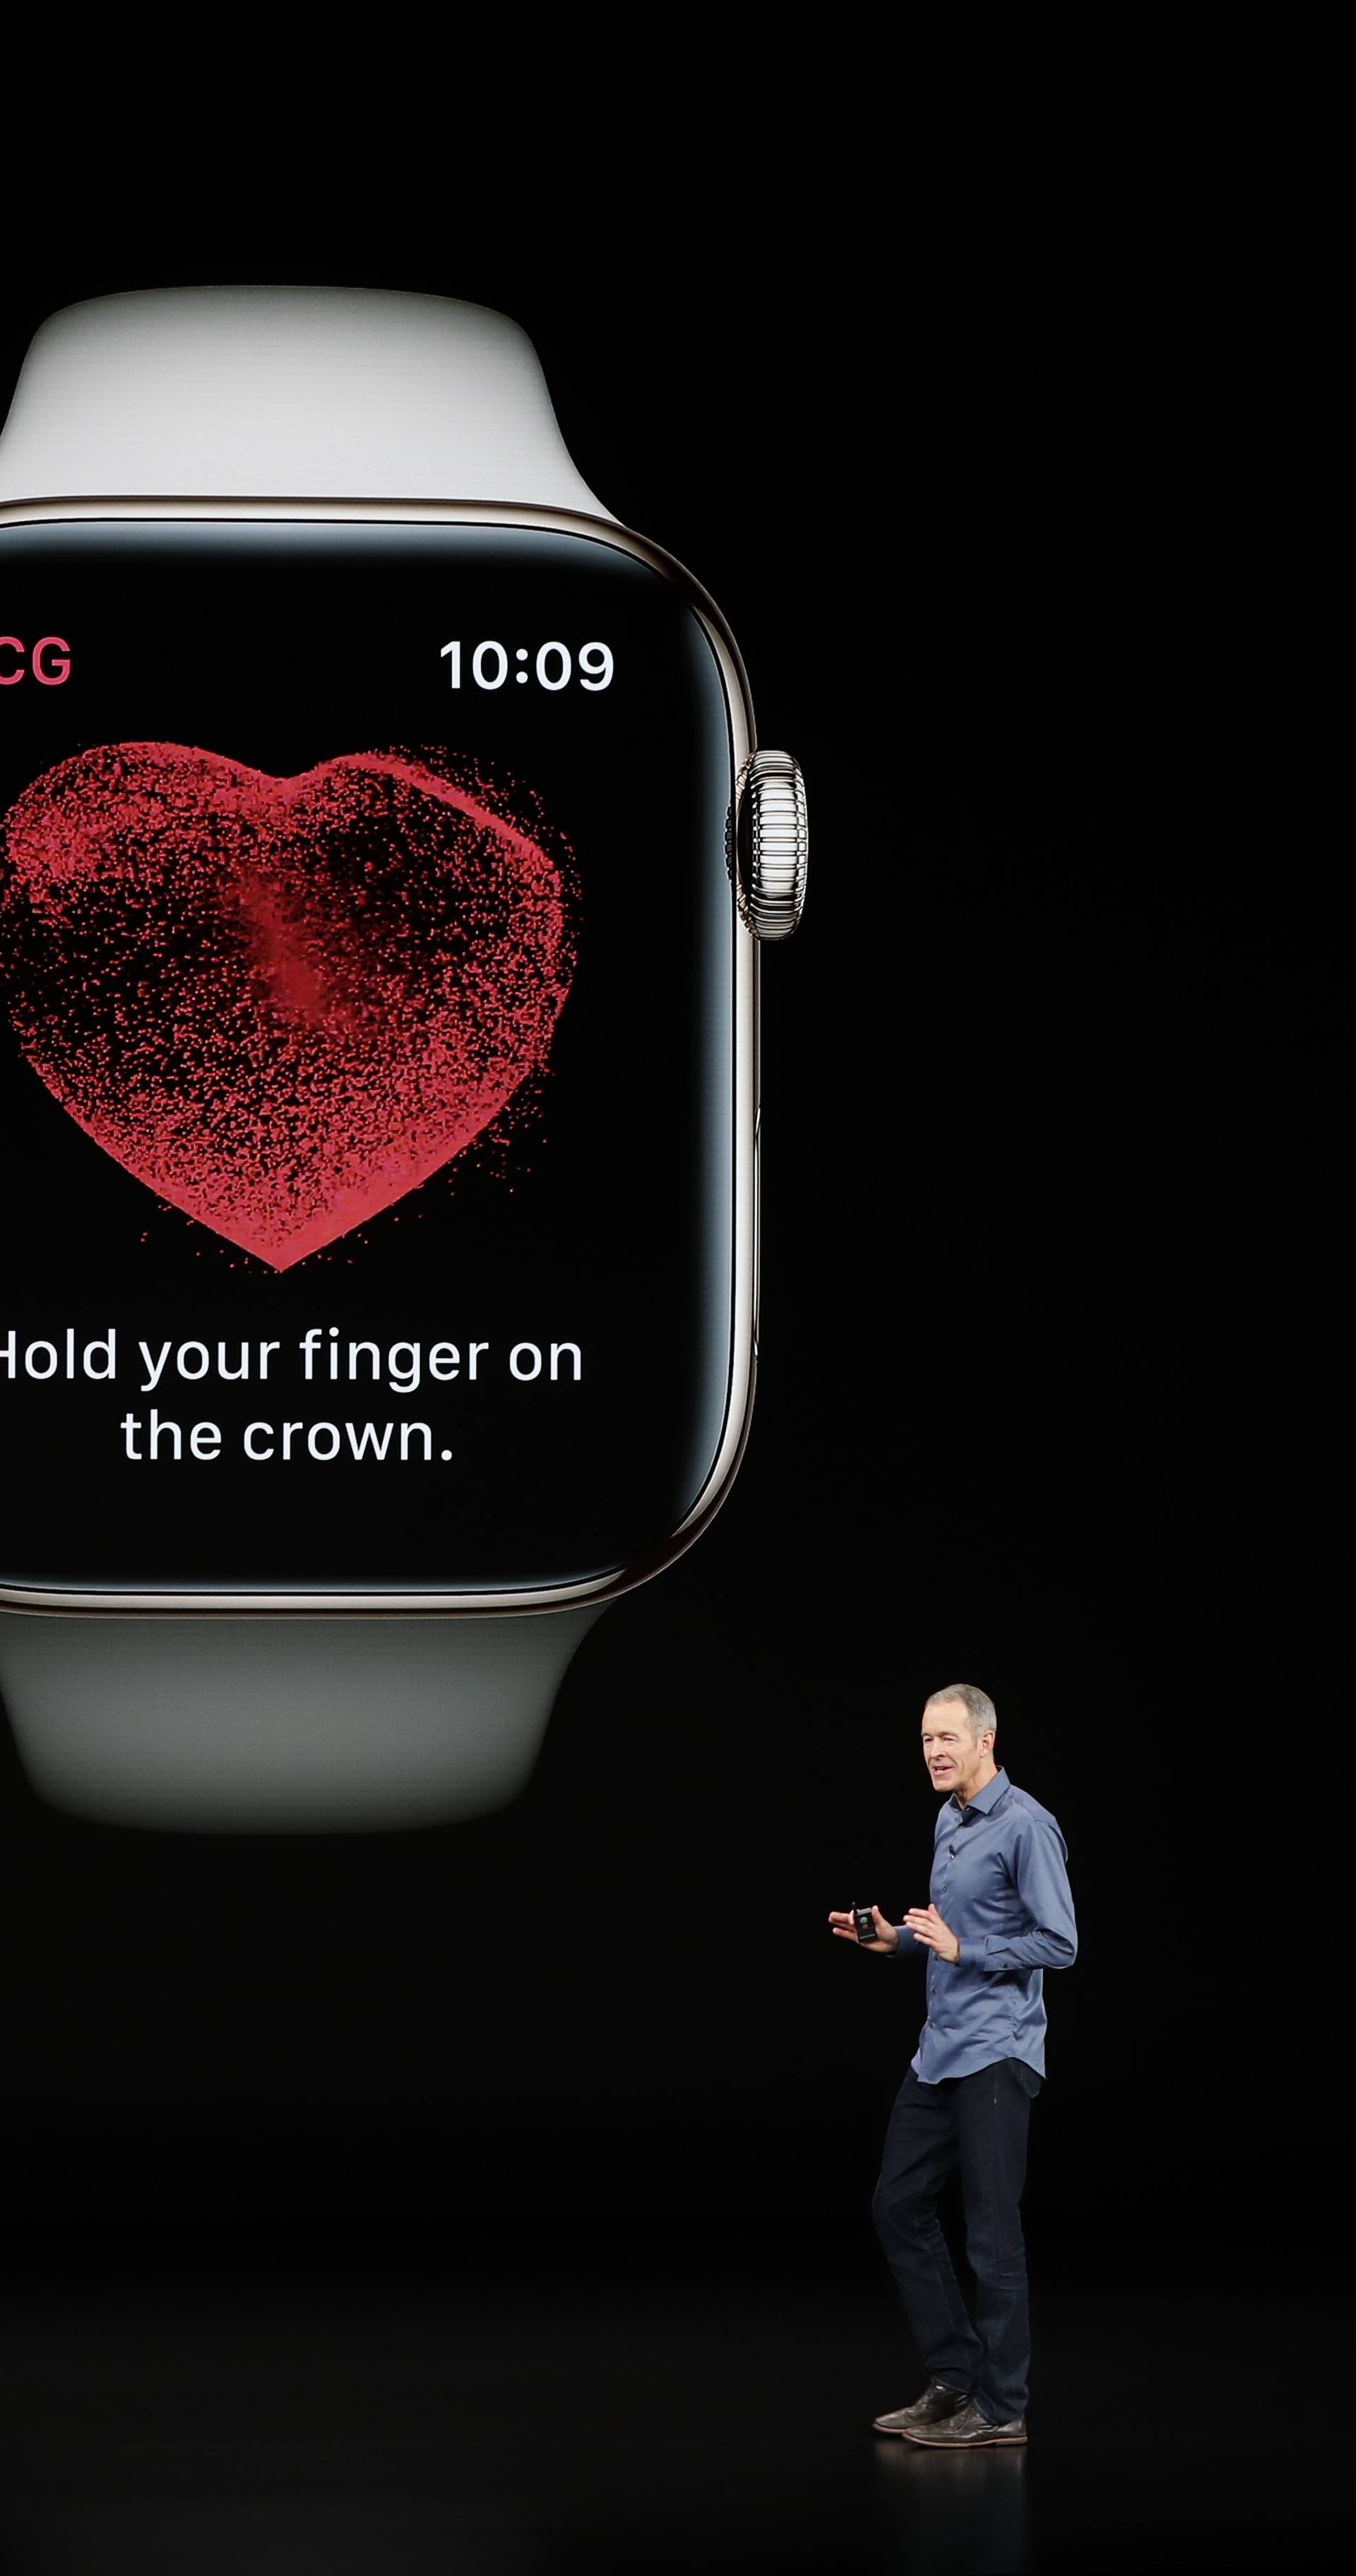 Williams, Chief Operating Officer of Apple , speaks about the the new Apple Watch Series 4 at an Apple Inc product launch in Cupertino